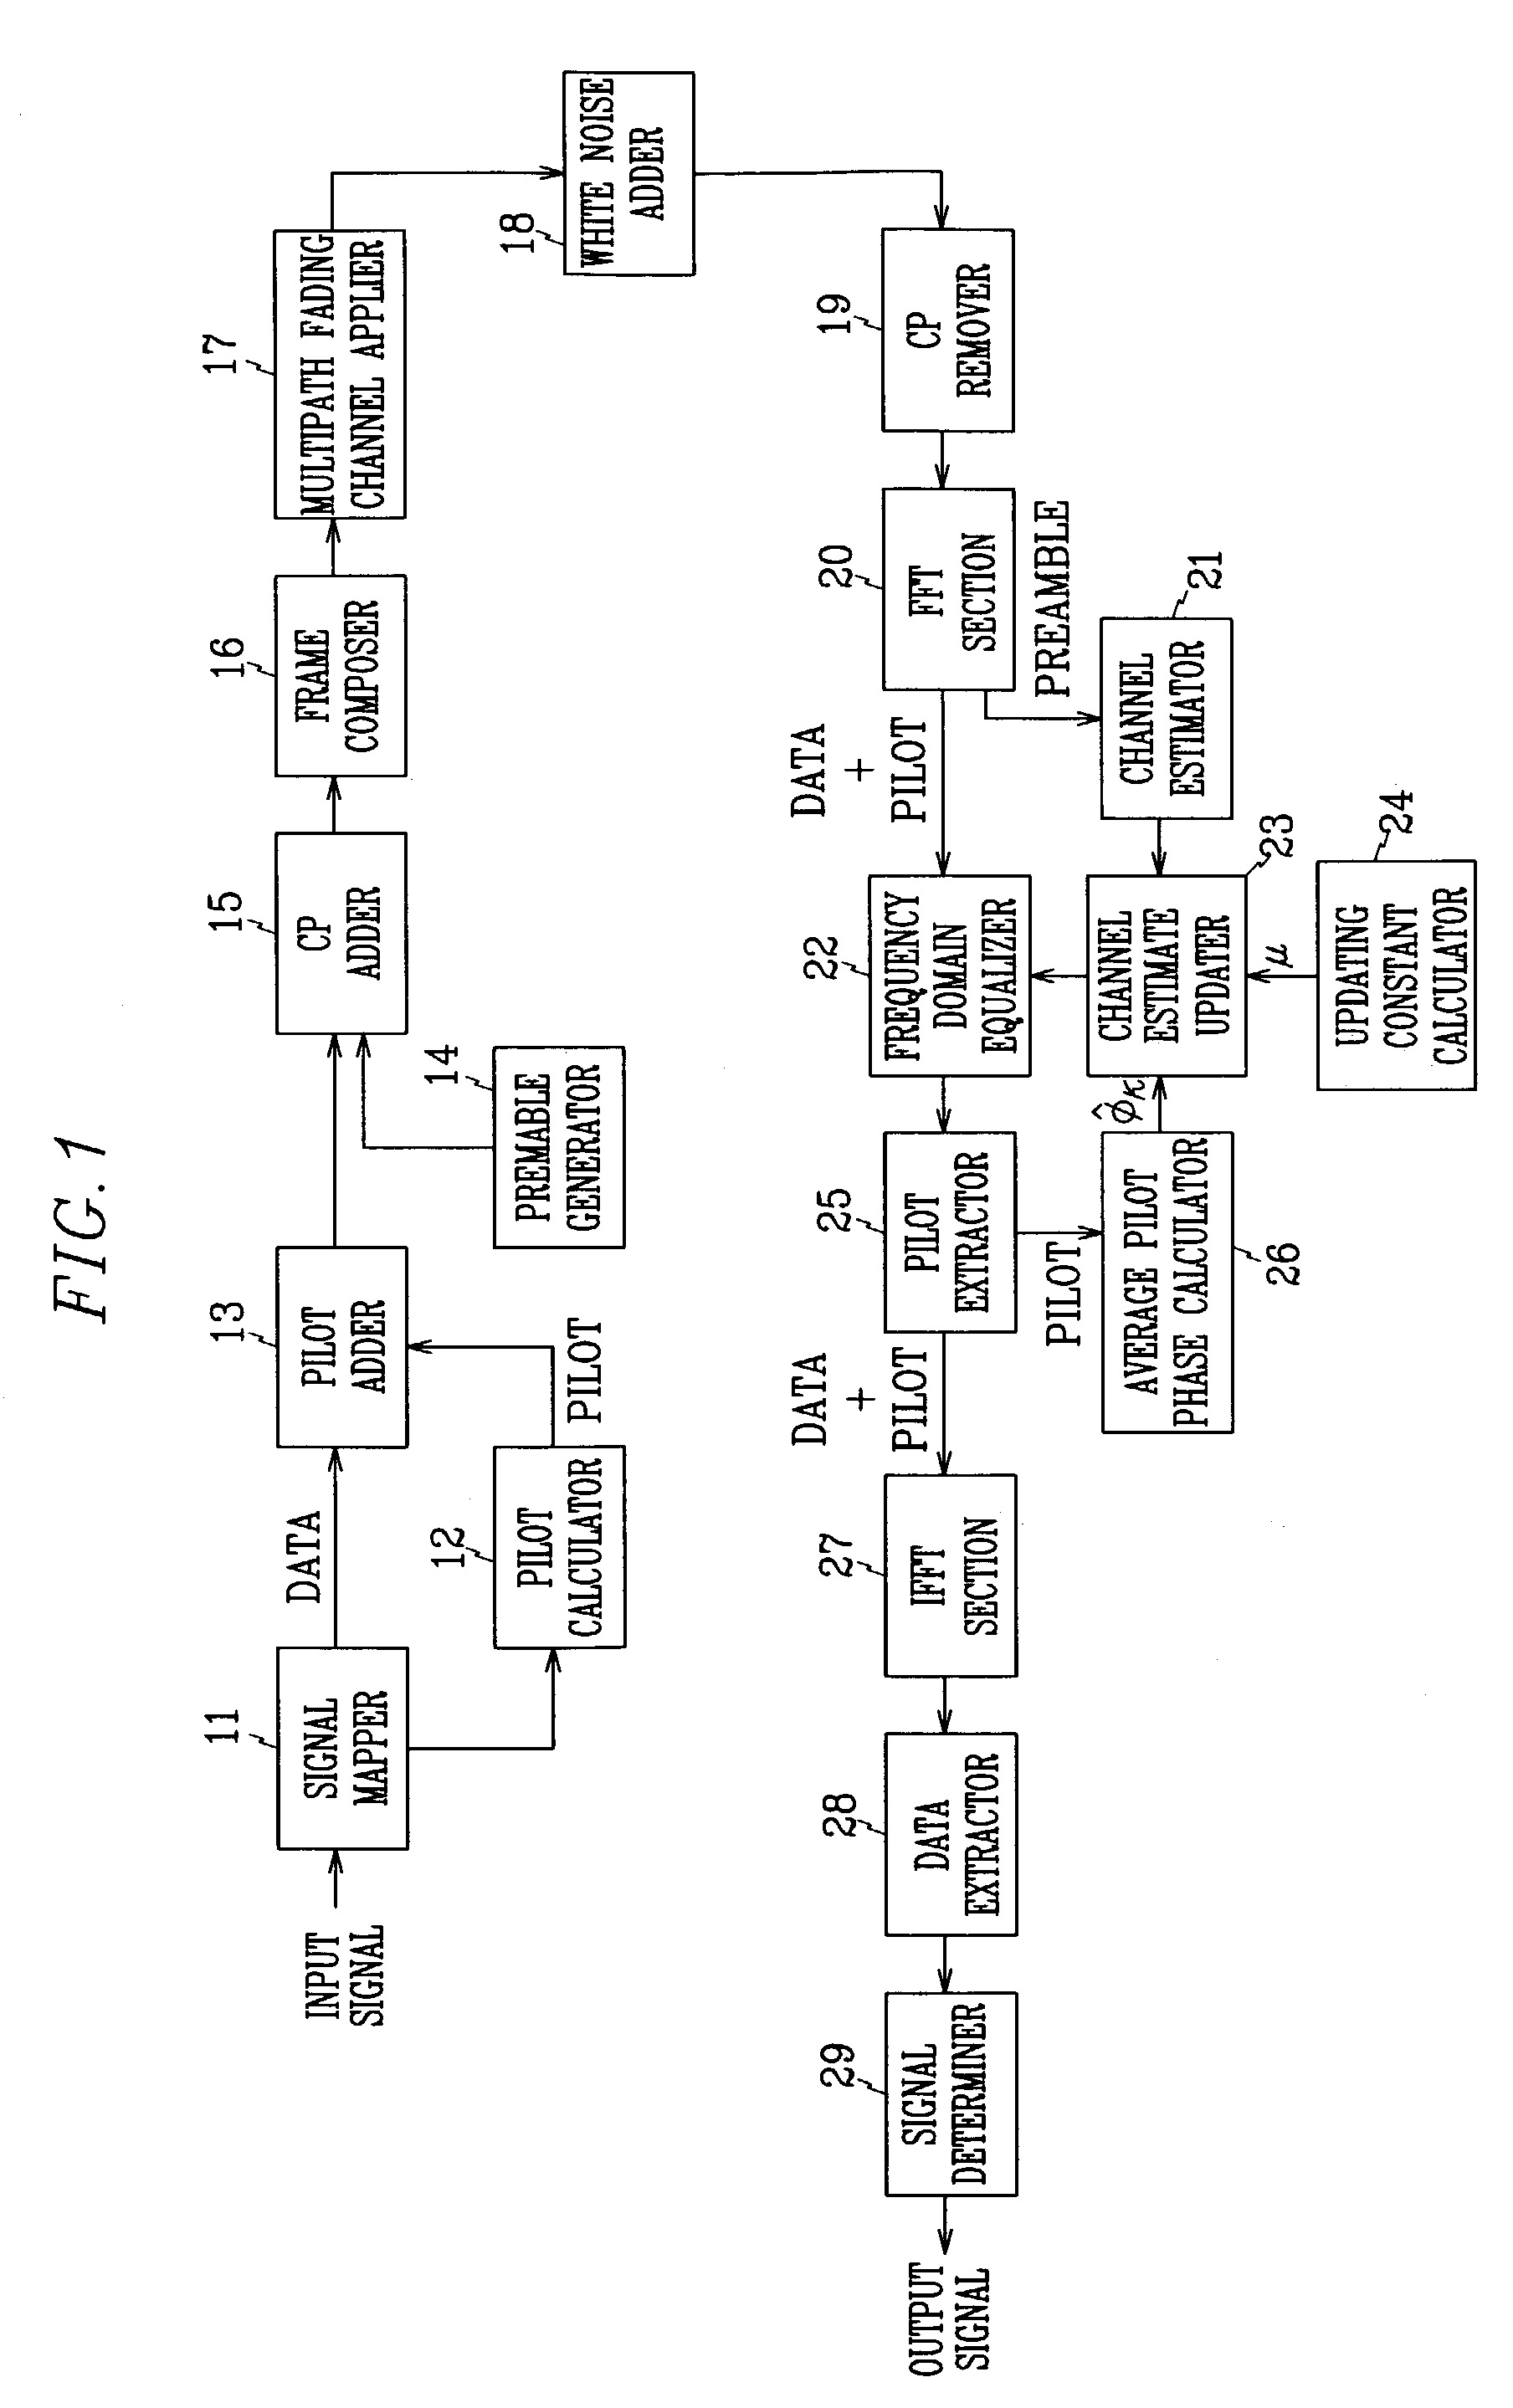 Apparatus and method for tracking residual frequency offset for single carrier-frequency domain equalizer system